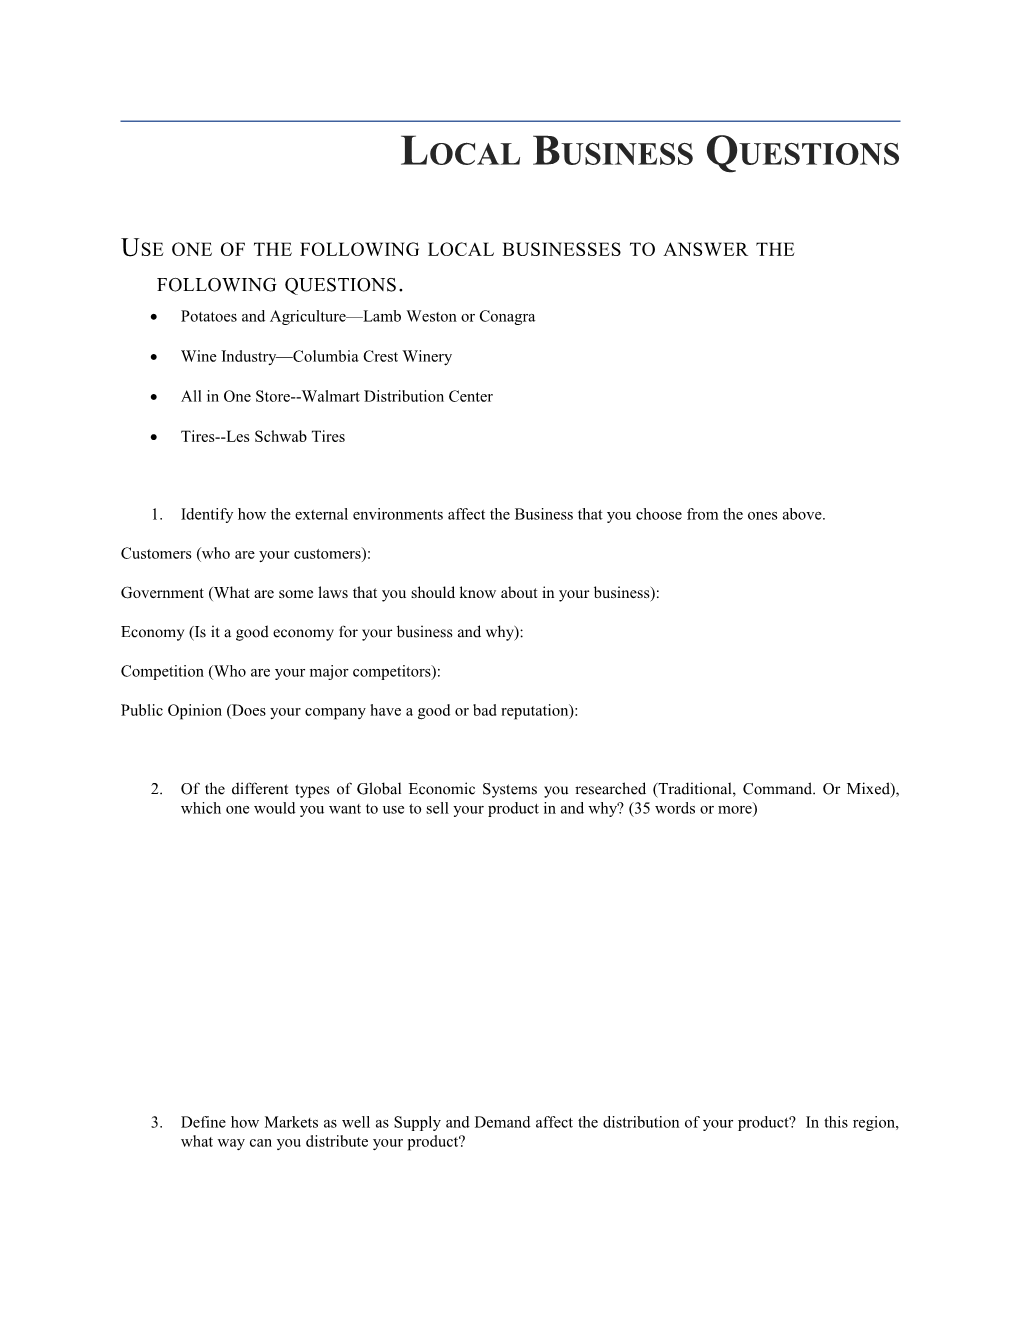 Use One of the Following Local Businesses to Answer the Following Questions